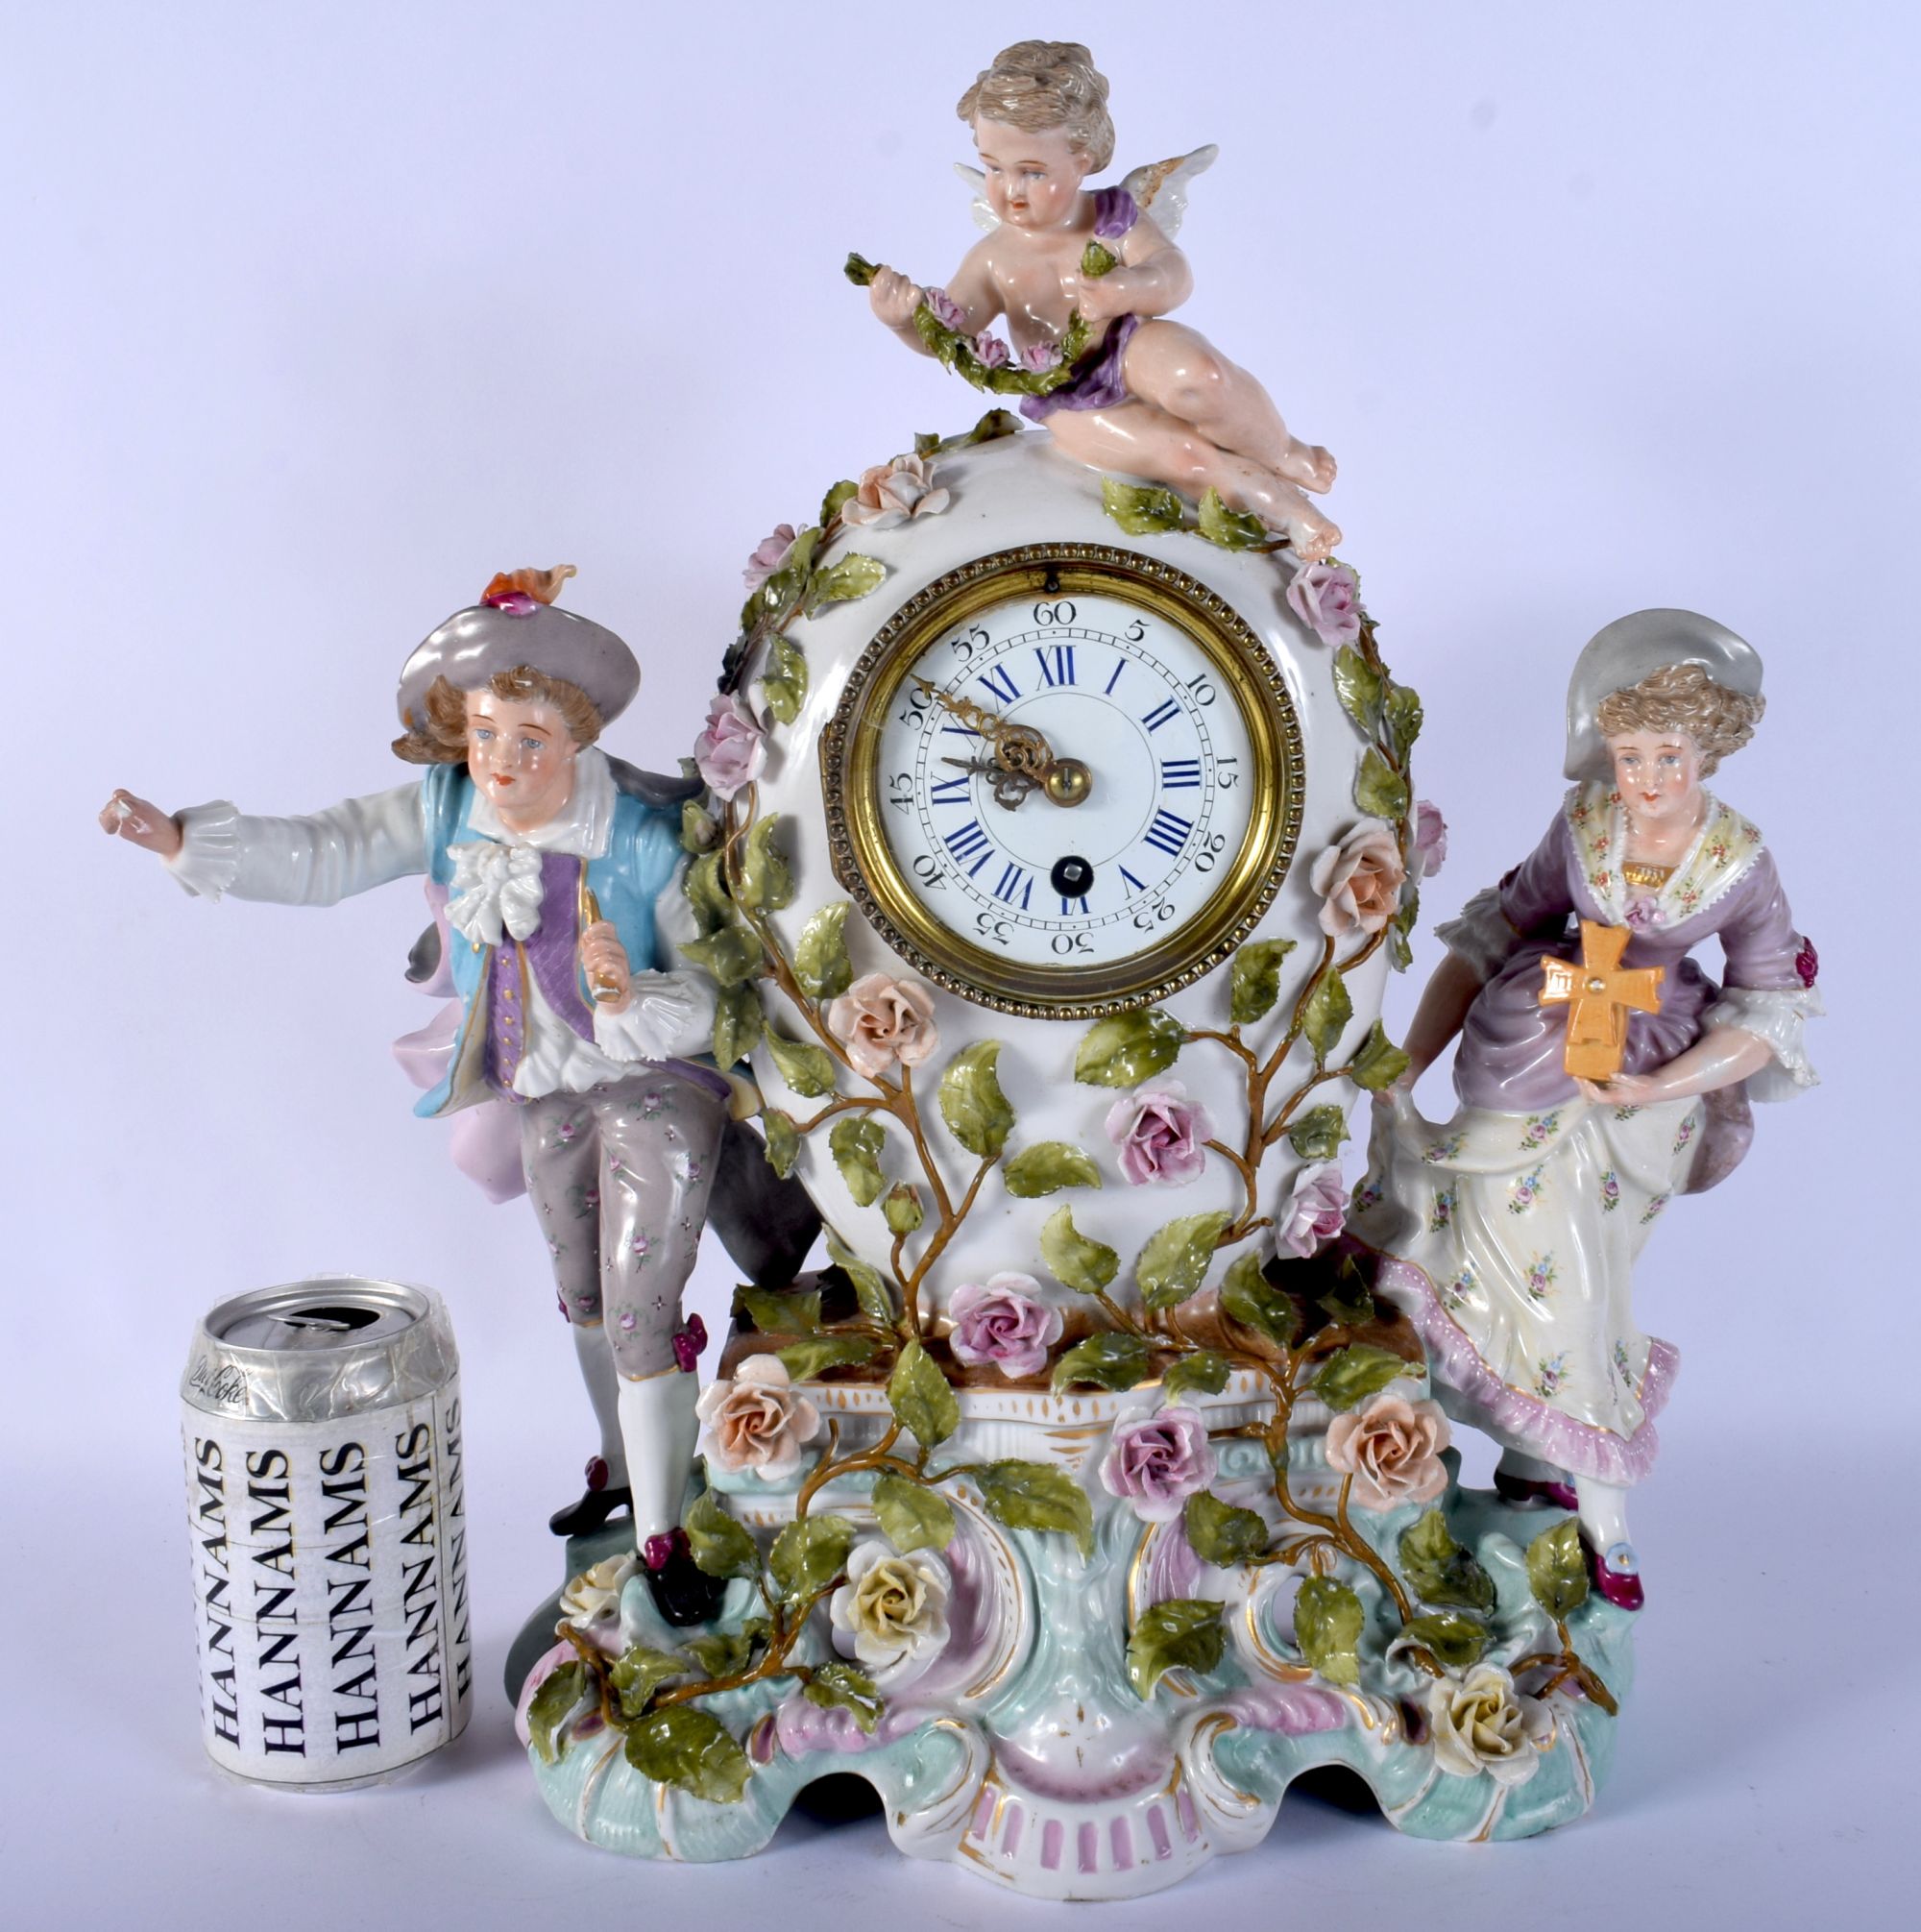 A RARE LARGE 19TH CENTURY GERMAN PORCELAIN CLOCK formed with figures. 41 cm x 30 cm.